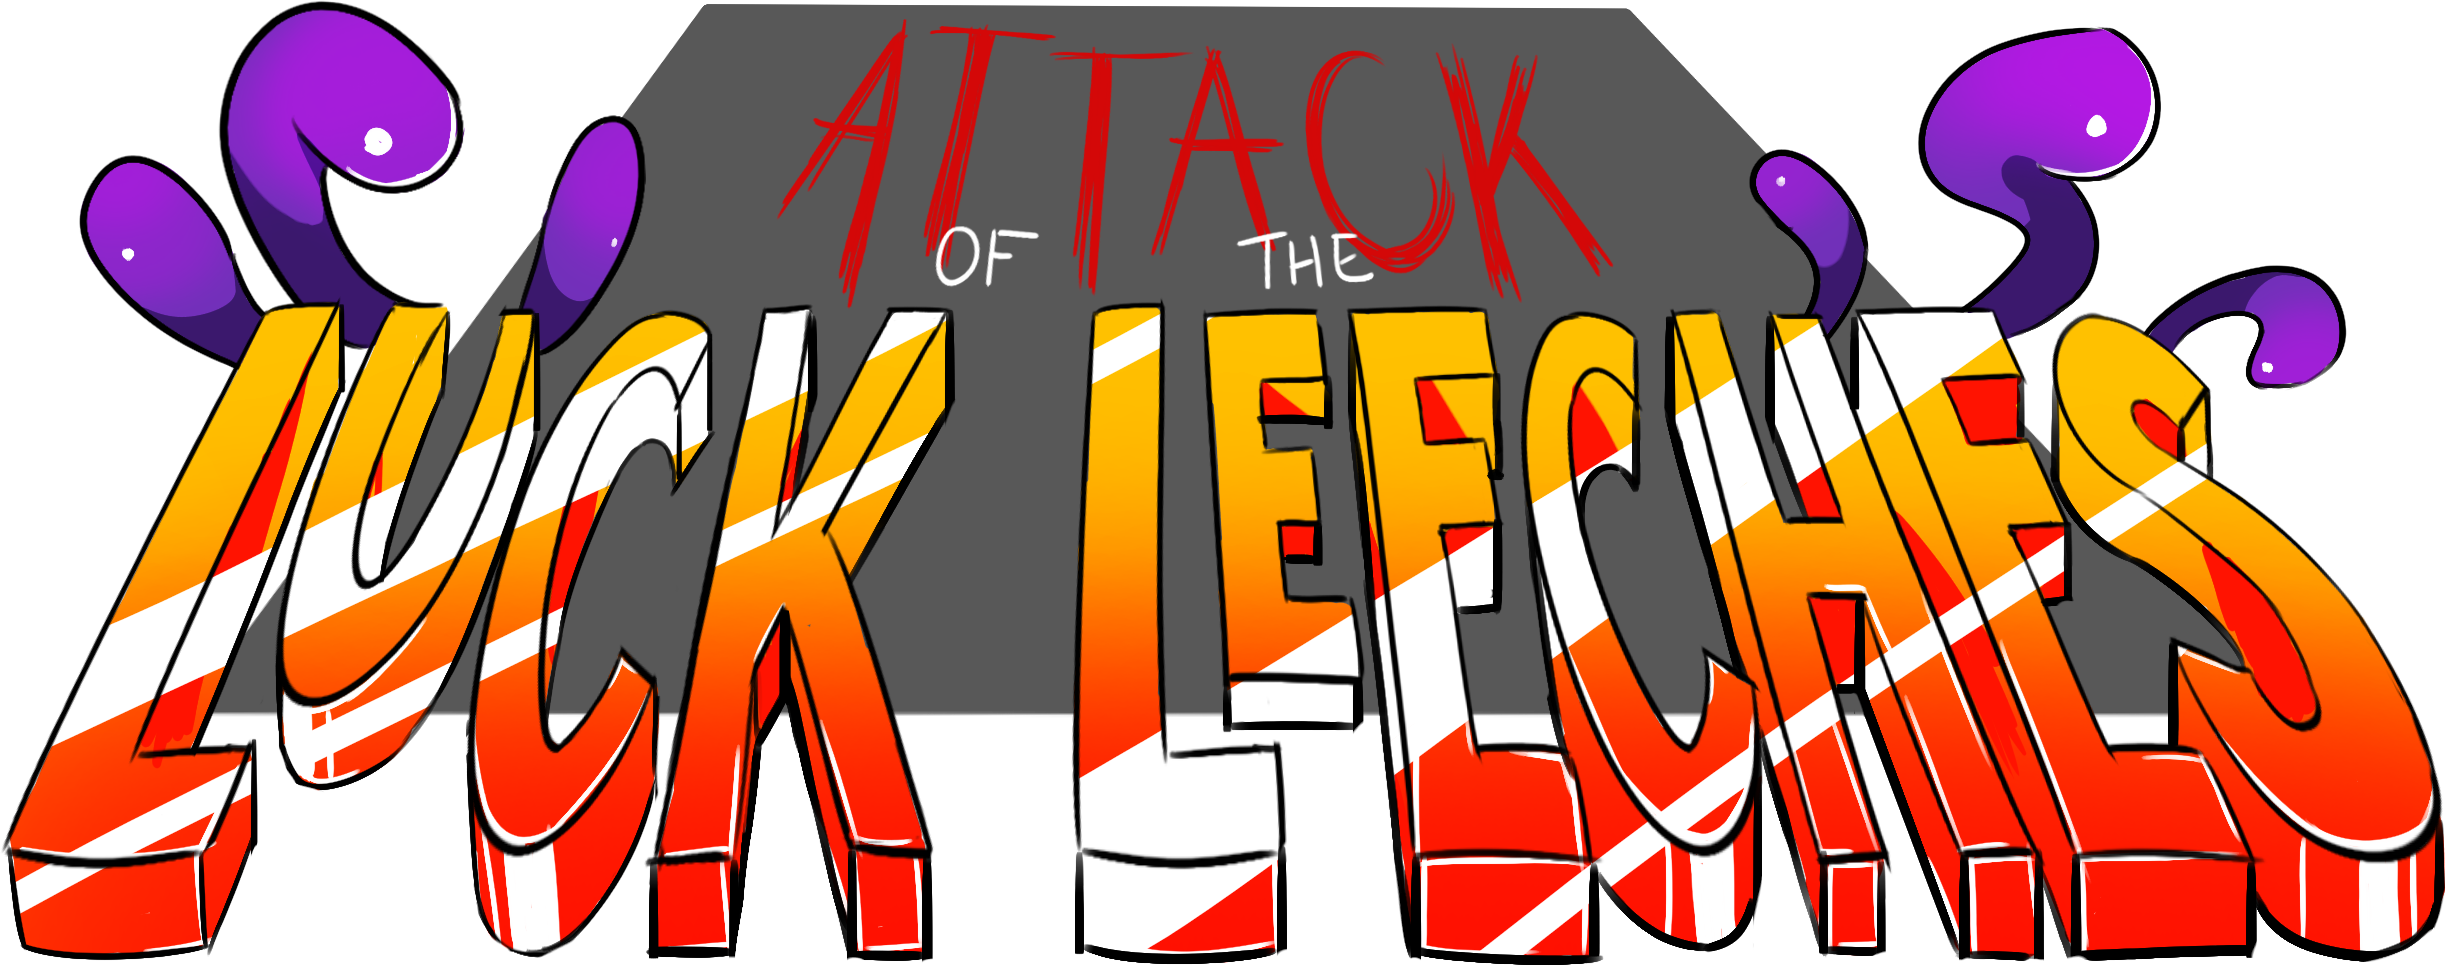 Attack Of The Luck Leeches!